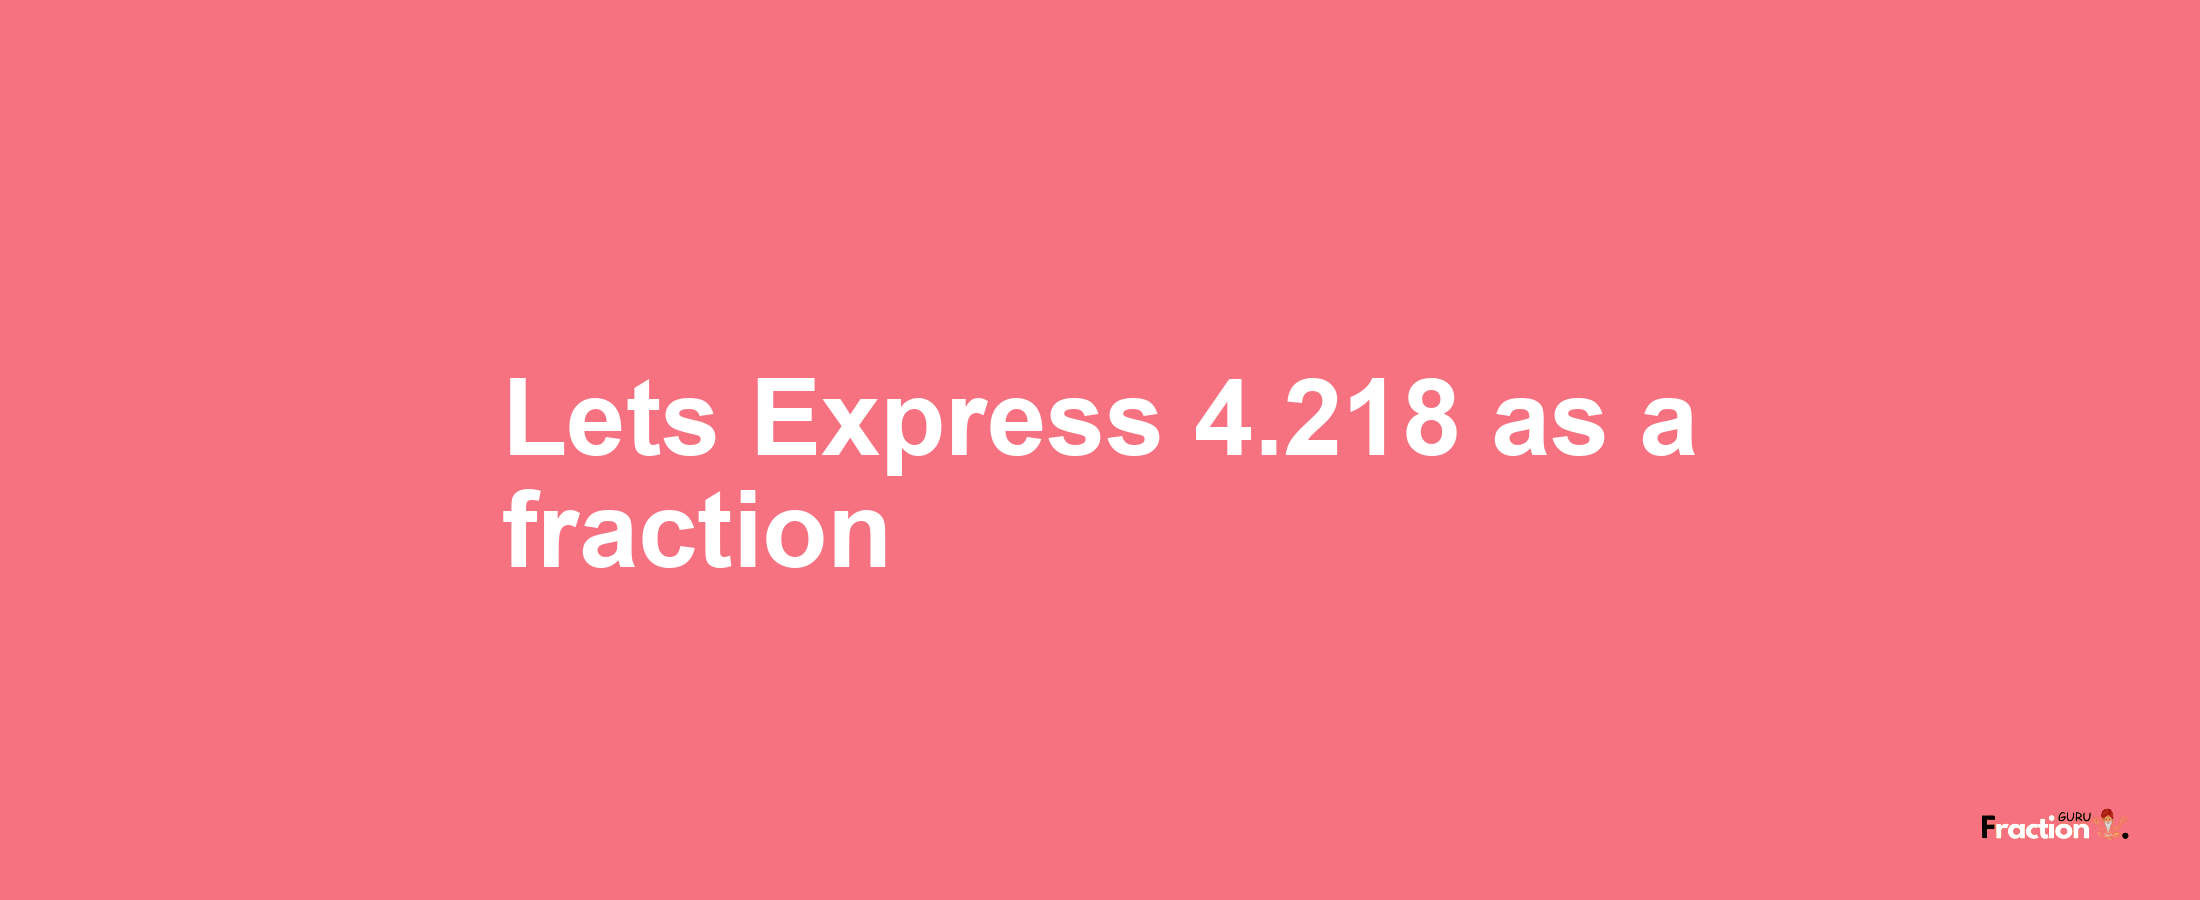 Lets Express 4.218 as afraction